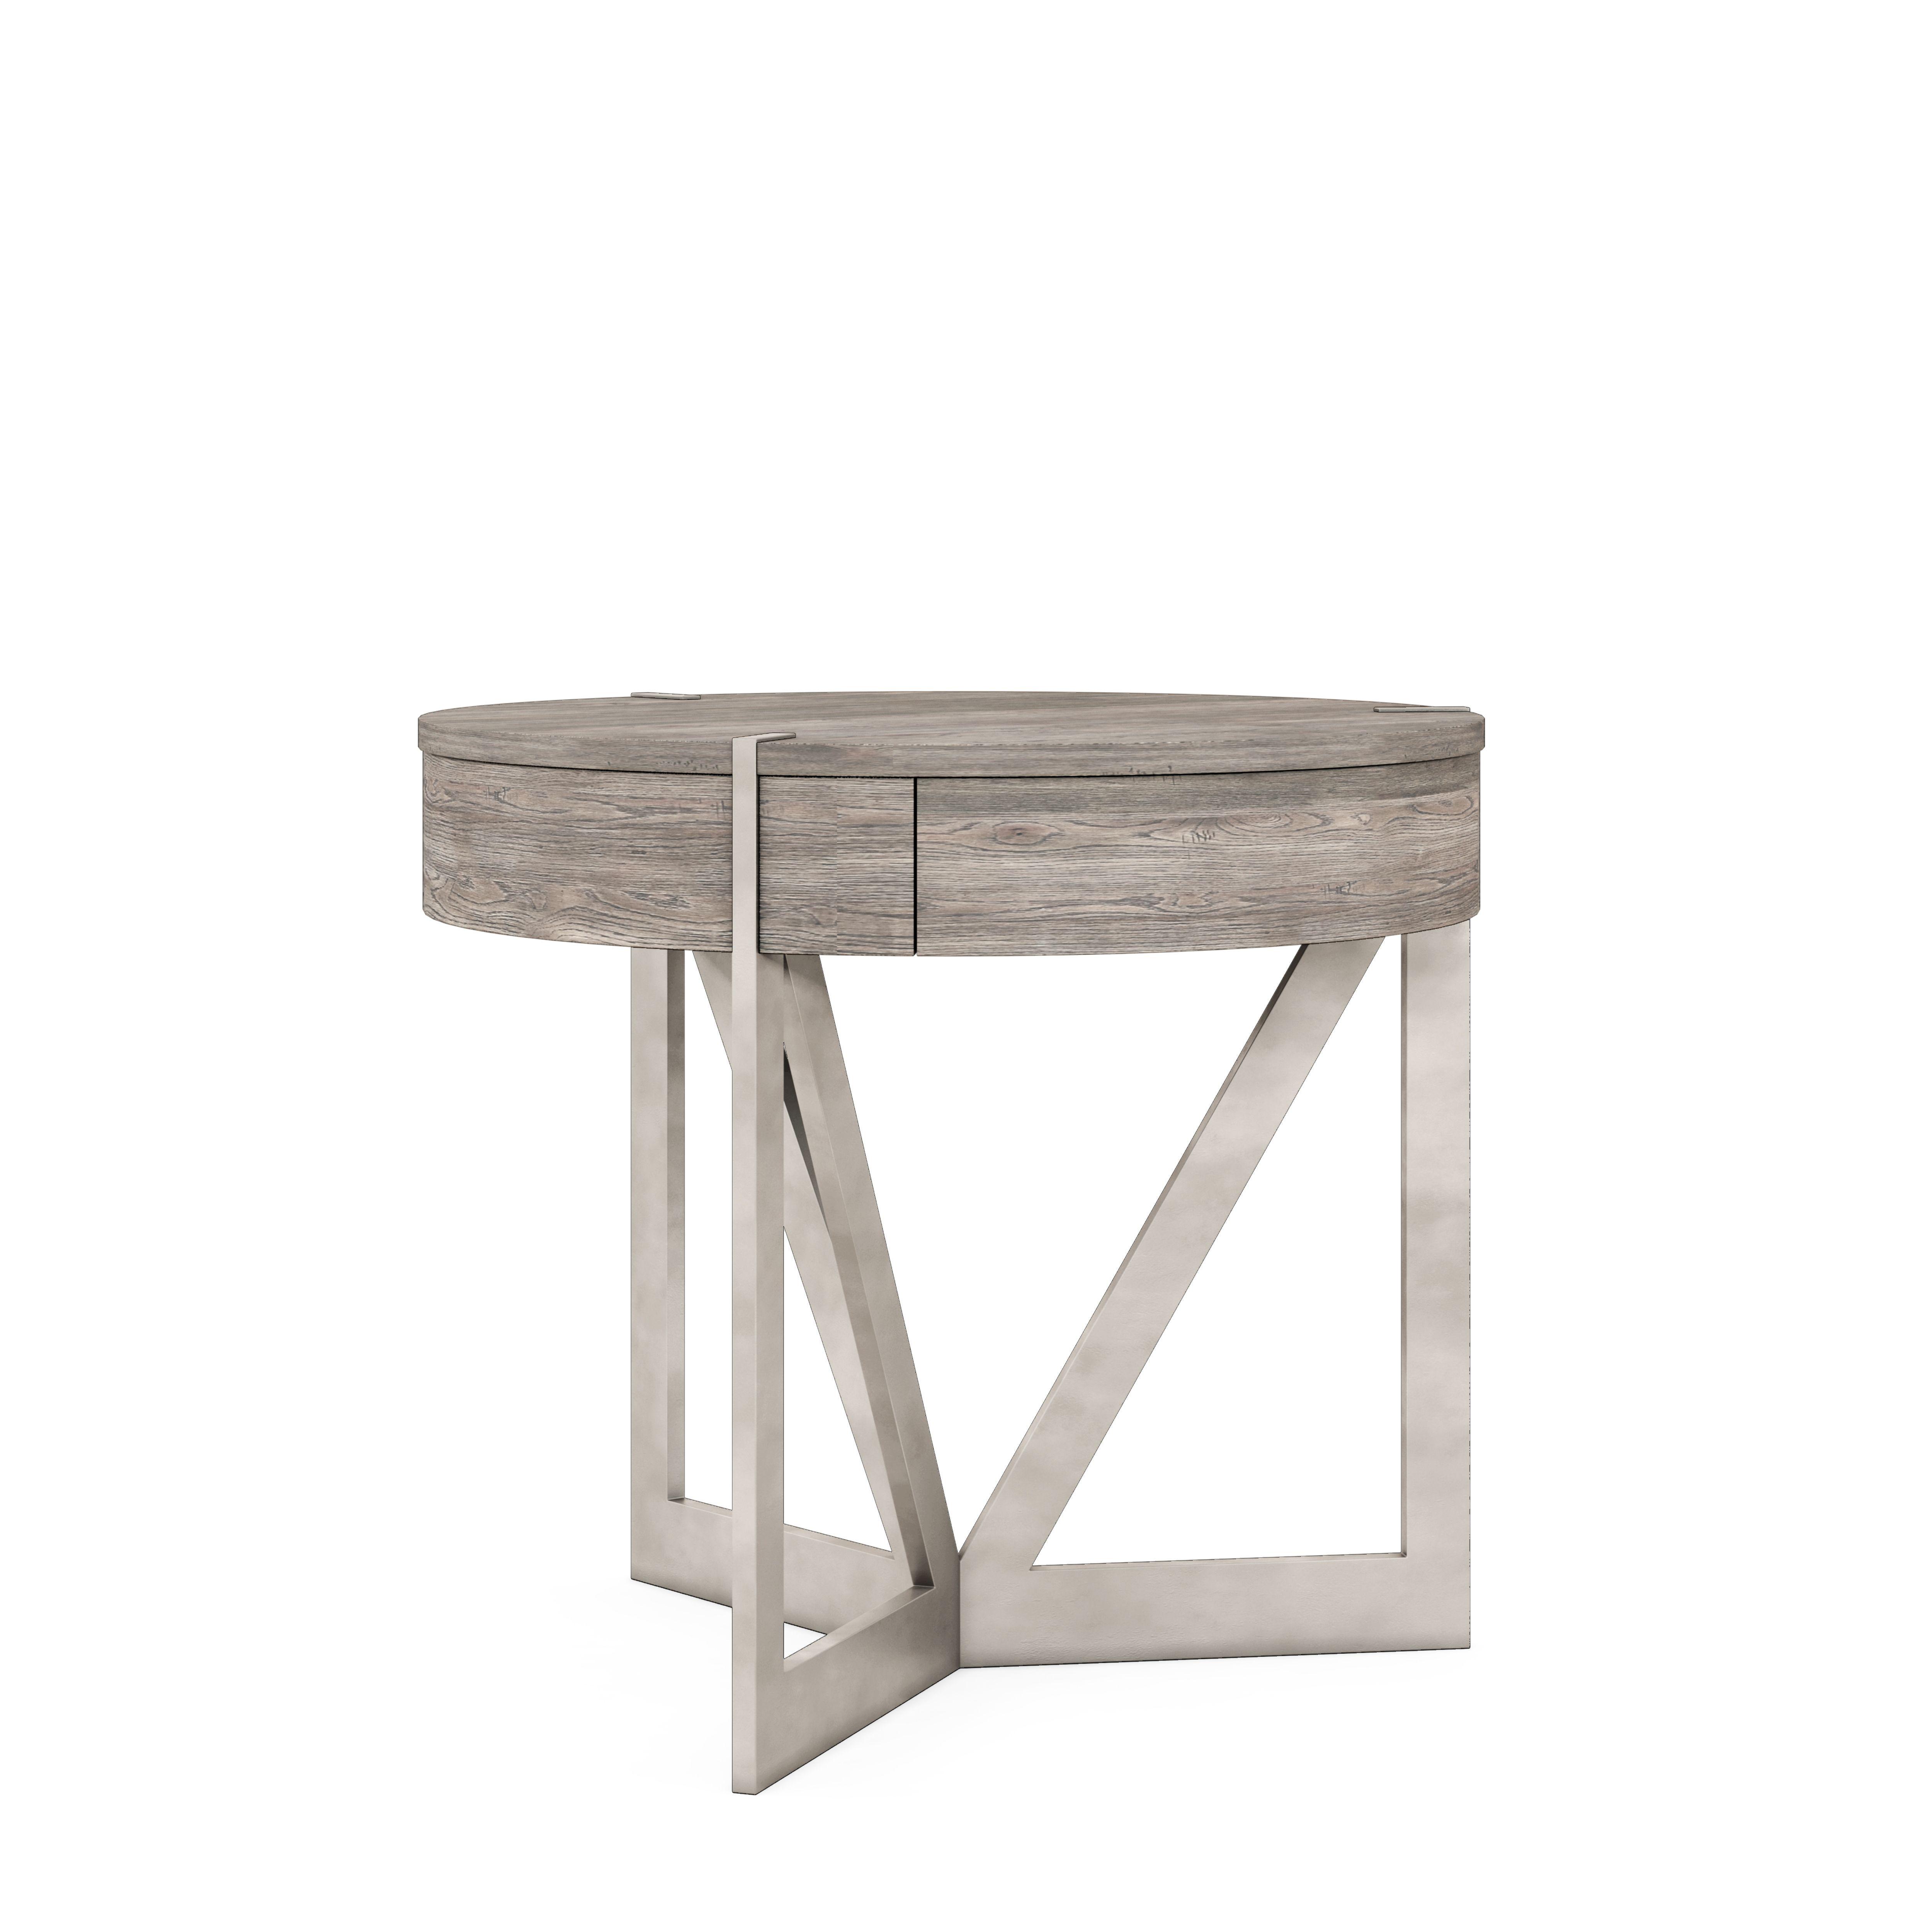 Contemporary End Table Sojourn 316364-2311 in Beige 